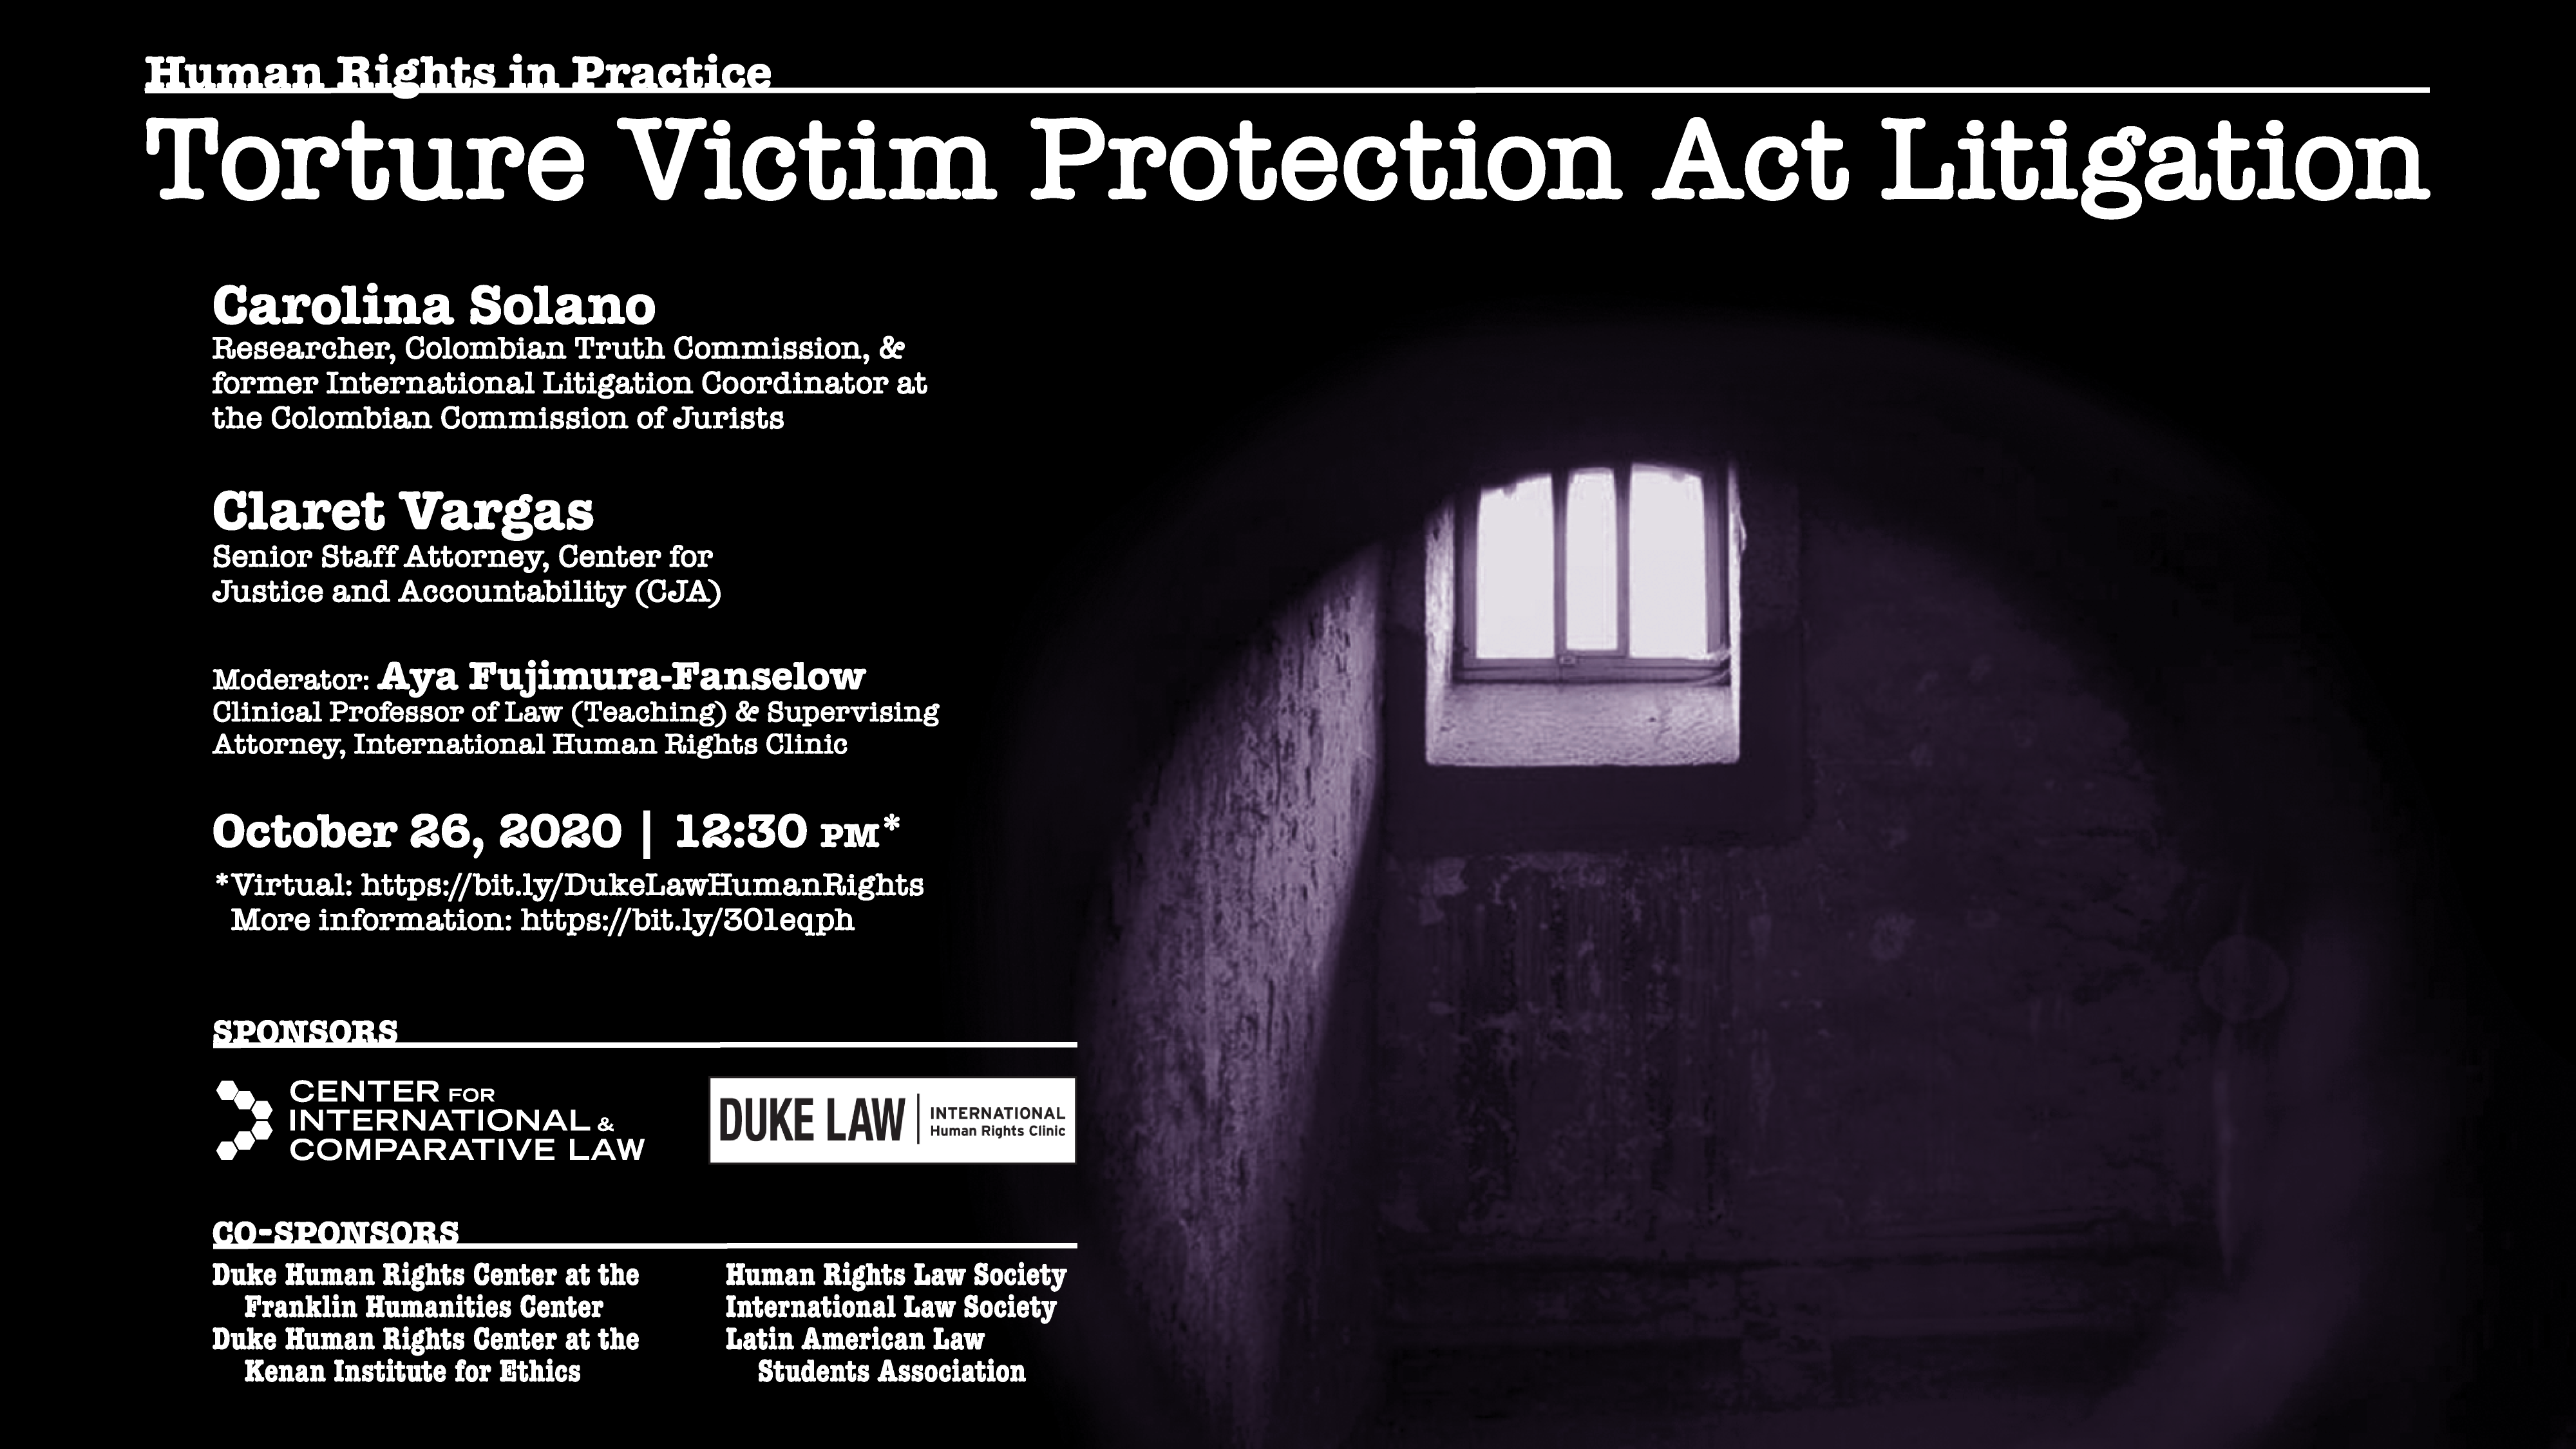 Human Rights in Practice -- Torture Victim Protection Act Litigation; Monday, October 26, 2020, at 12:30 p.m.; Virtual